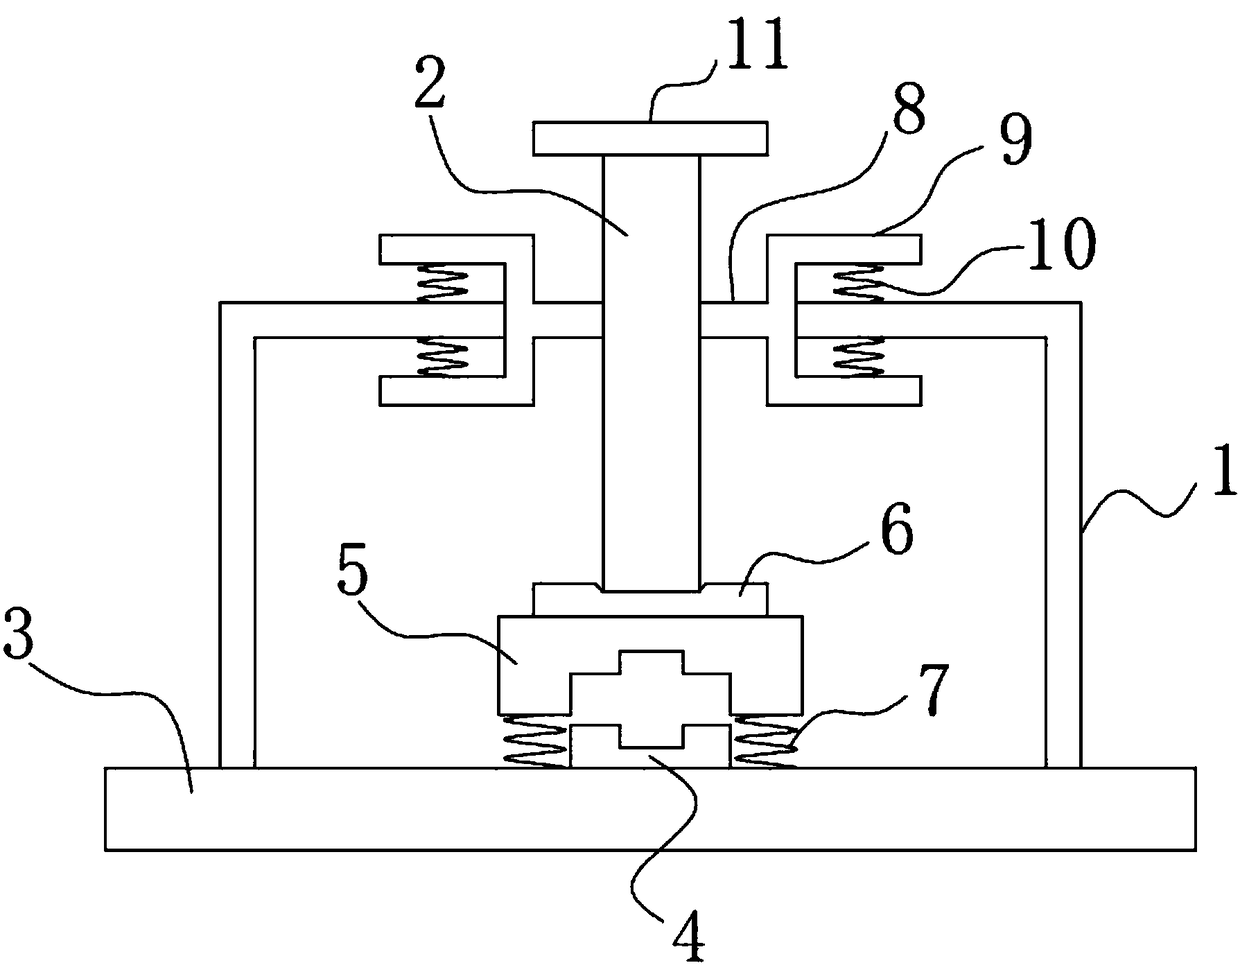 Limiting mechanism for cable transferring